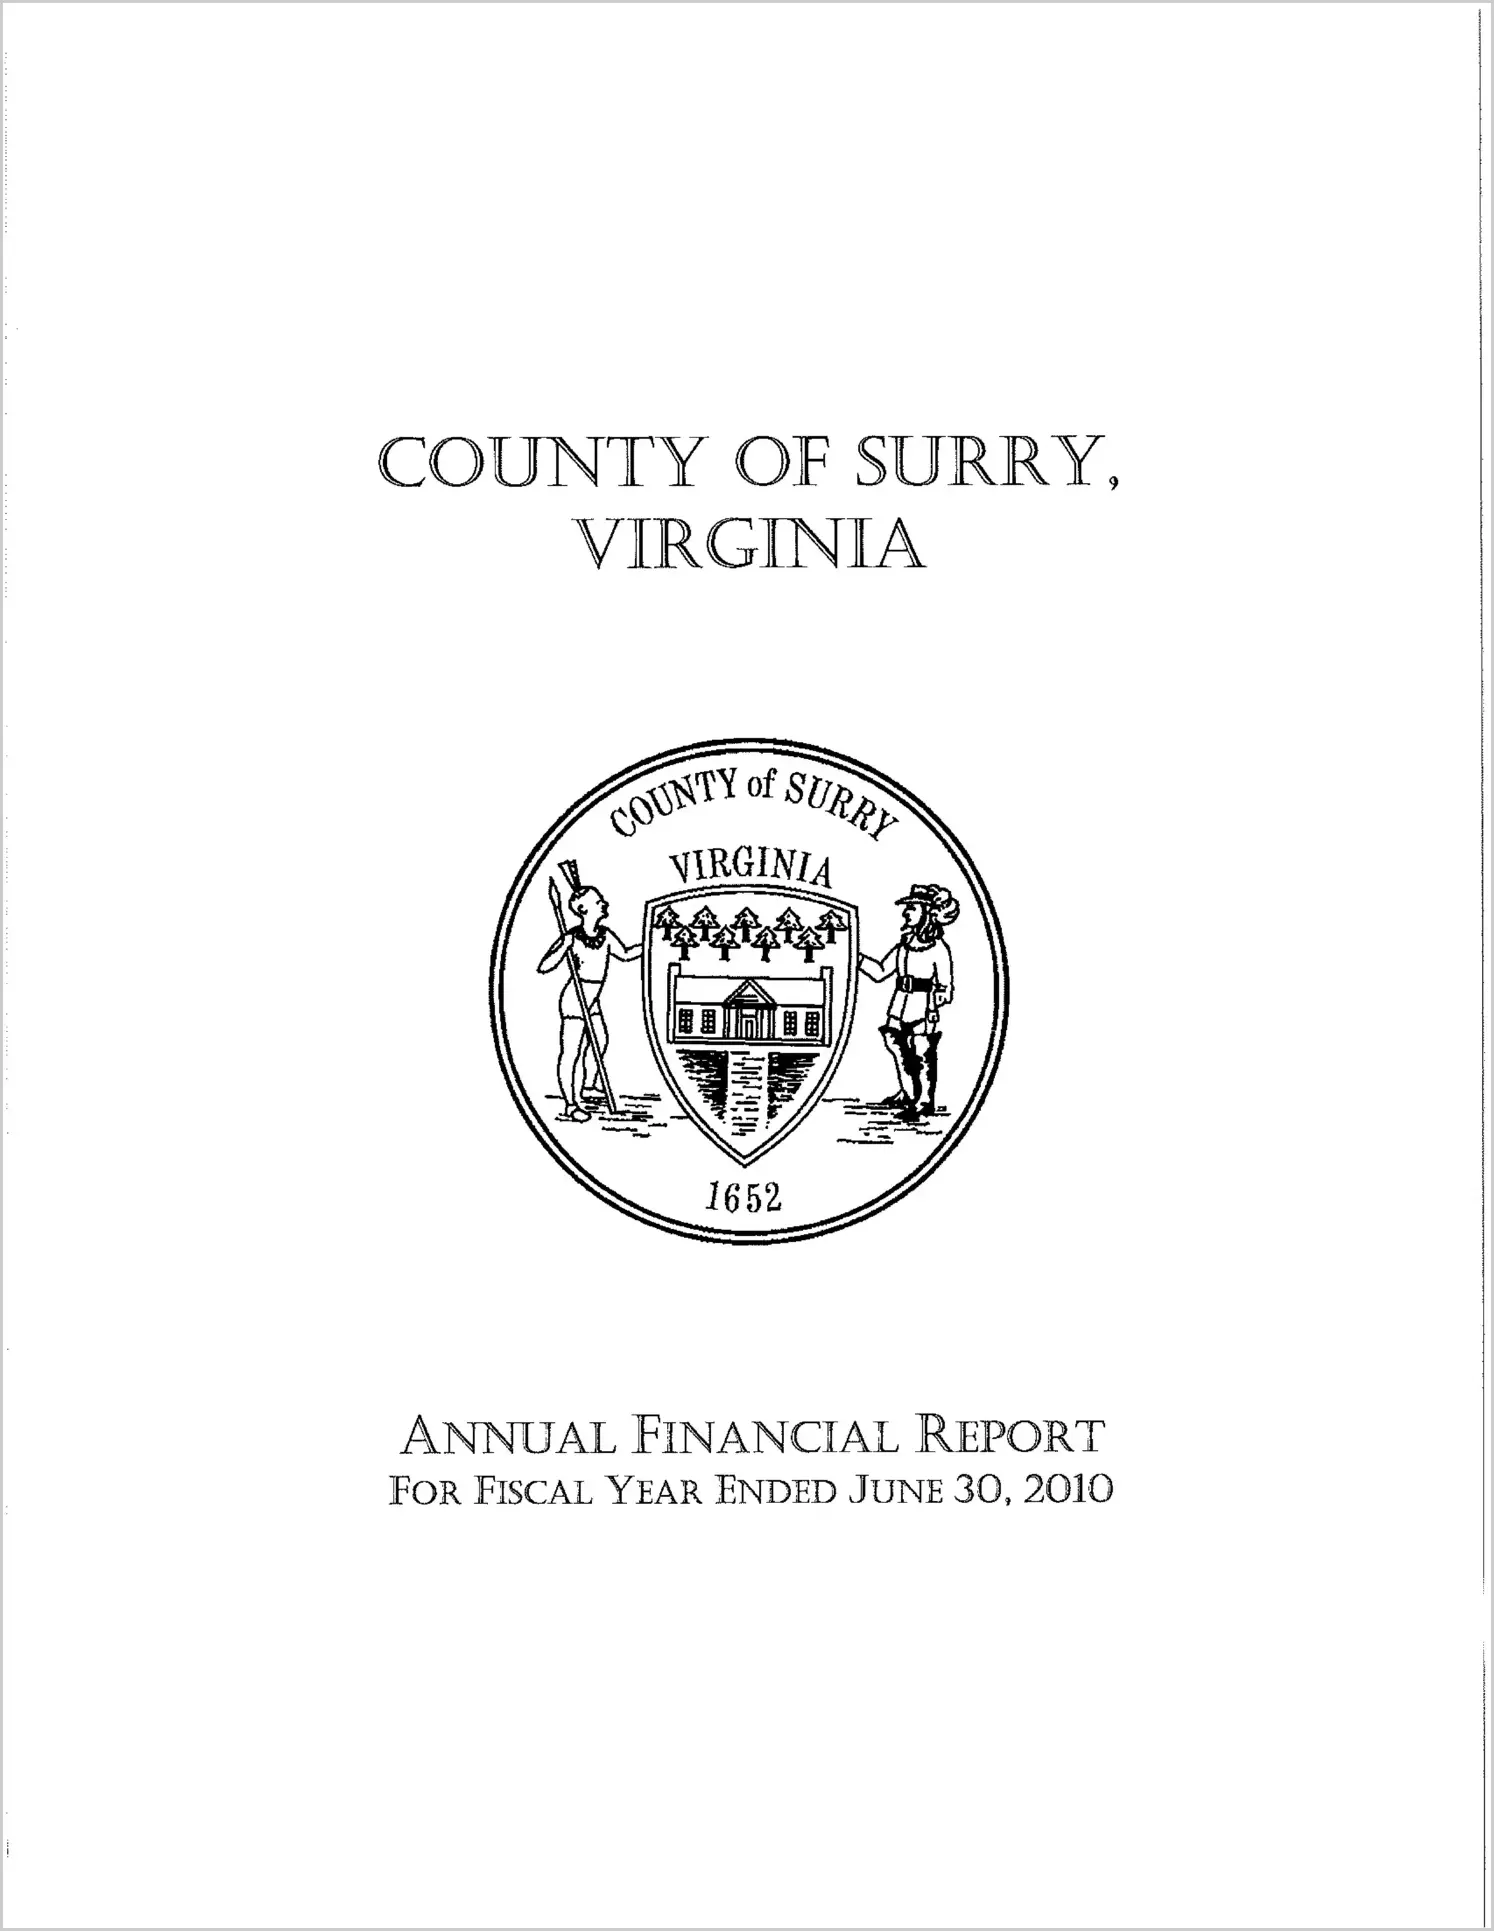 2010 Annual Financial Report for County of Surry